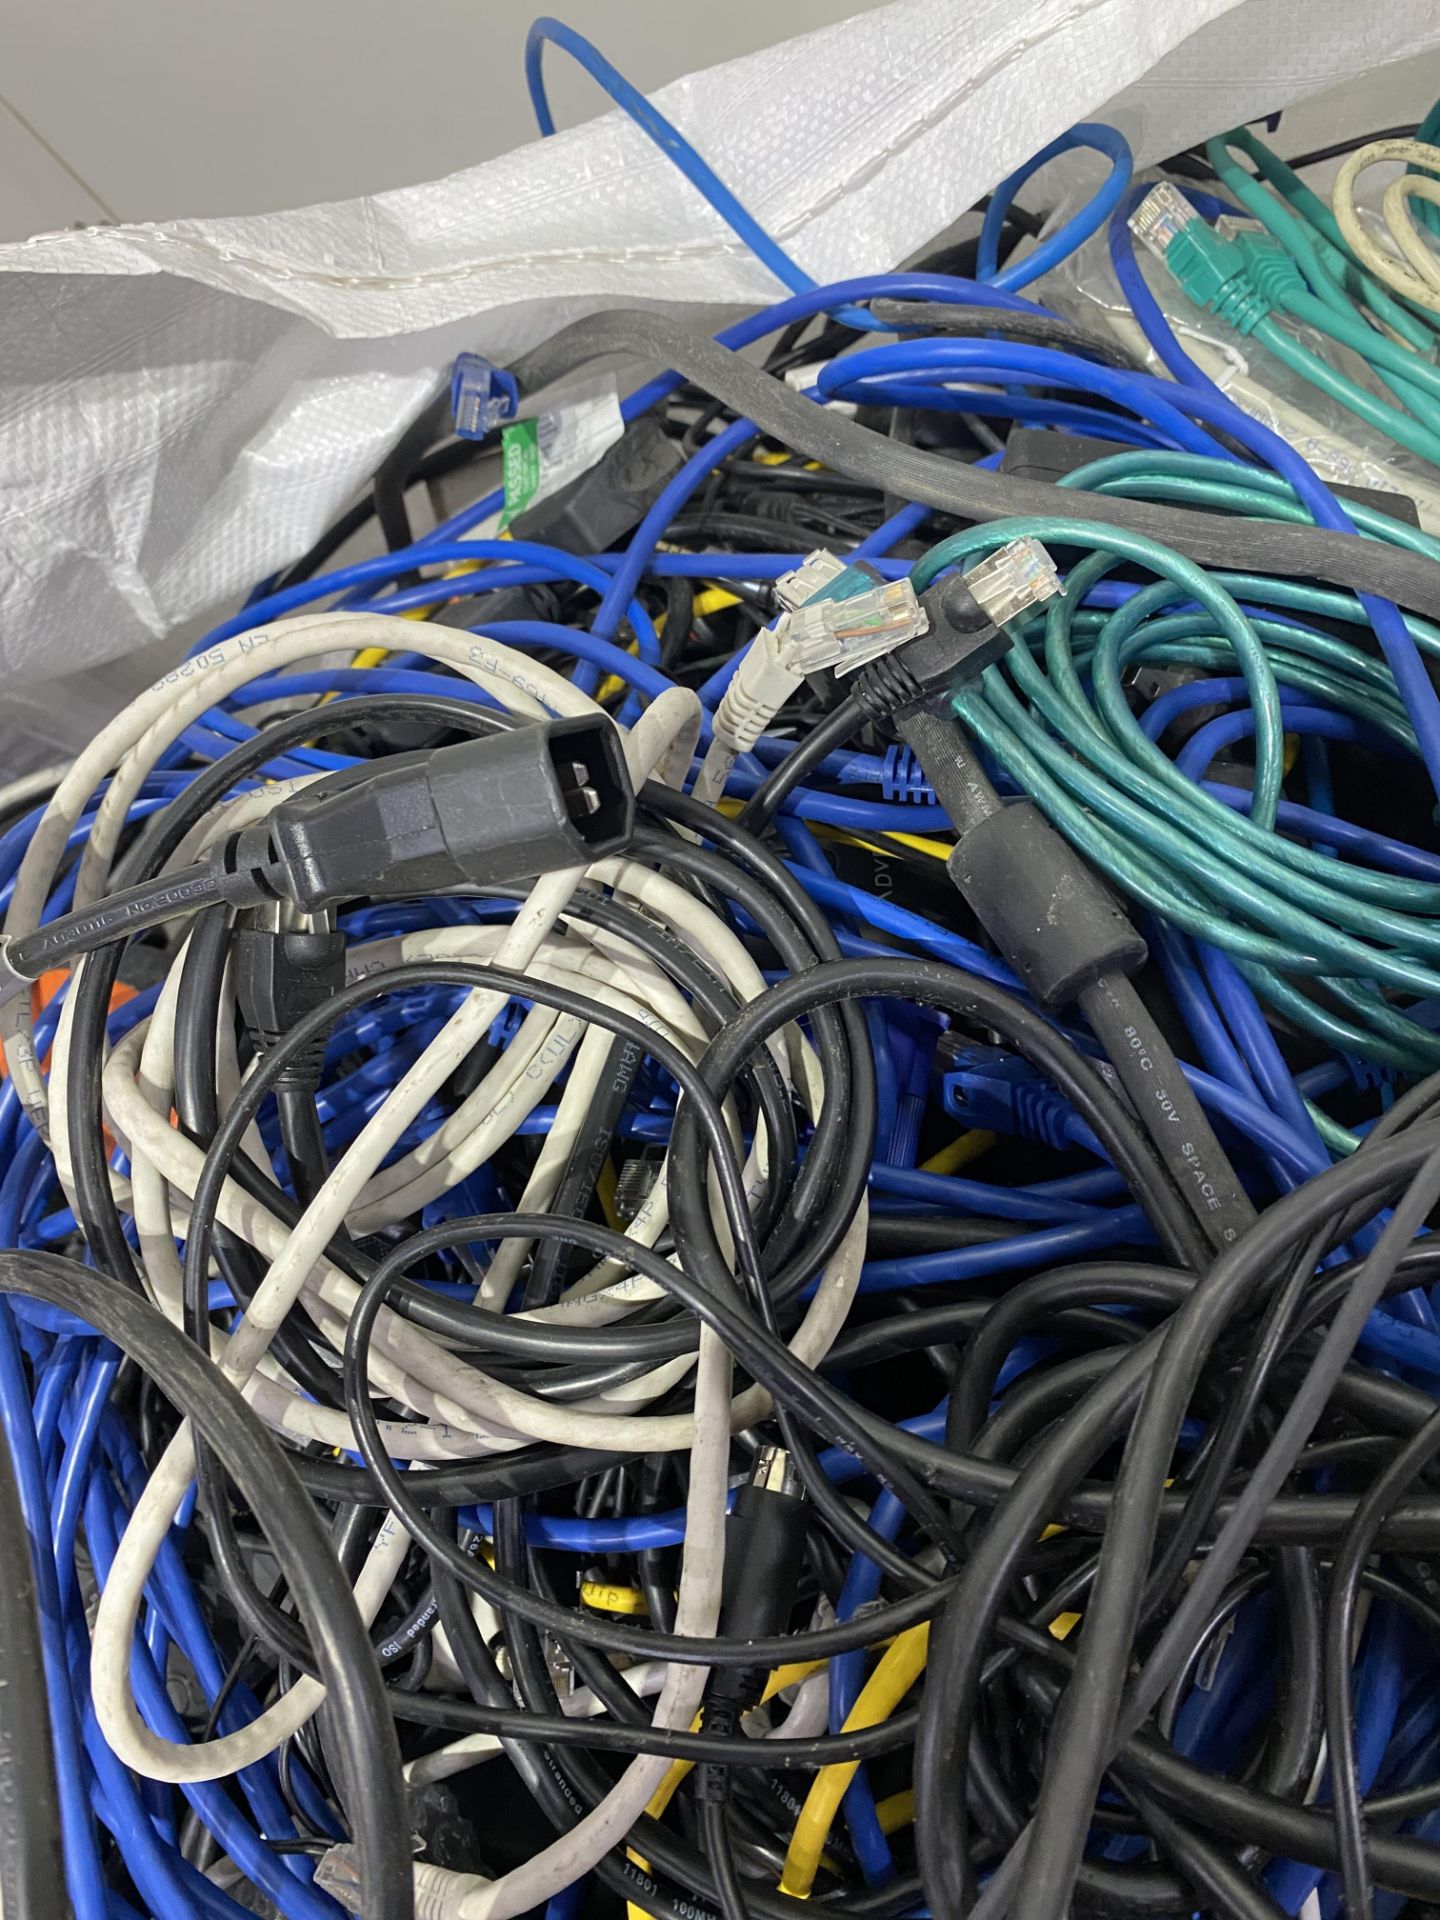 Large Quantity Of Various Electronic Wires, 140kg Bag - Image 7 of 12